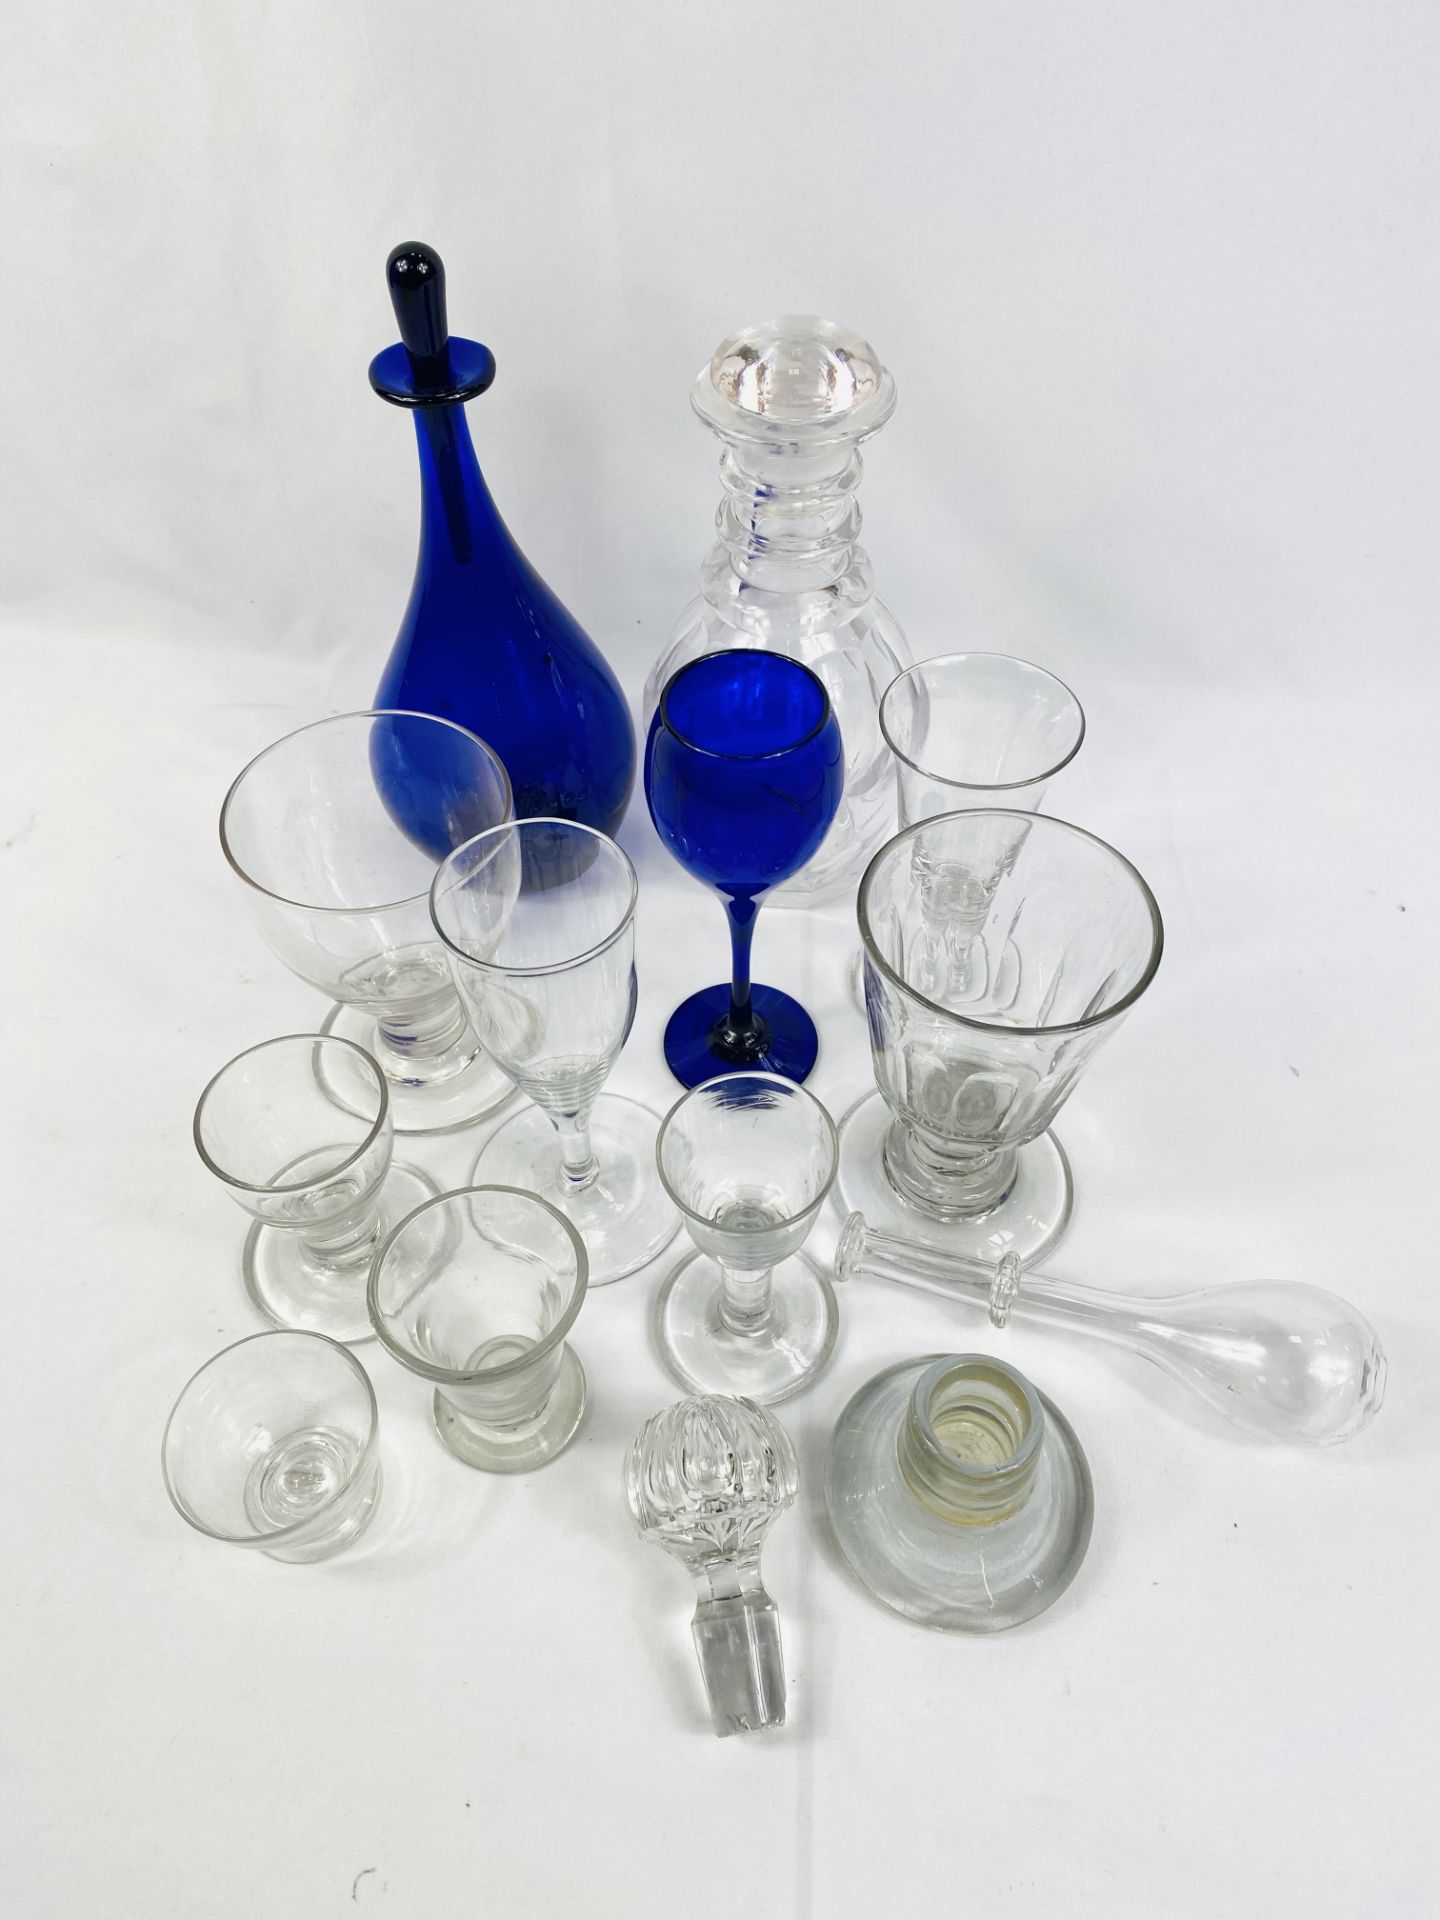 Cut glass decanter and other glassware - Image 2 of 4